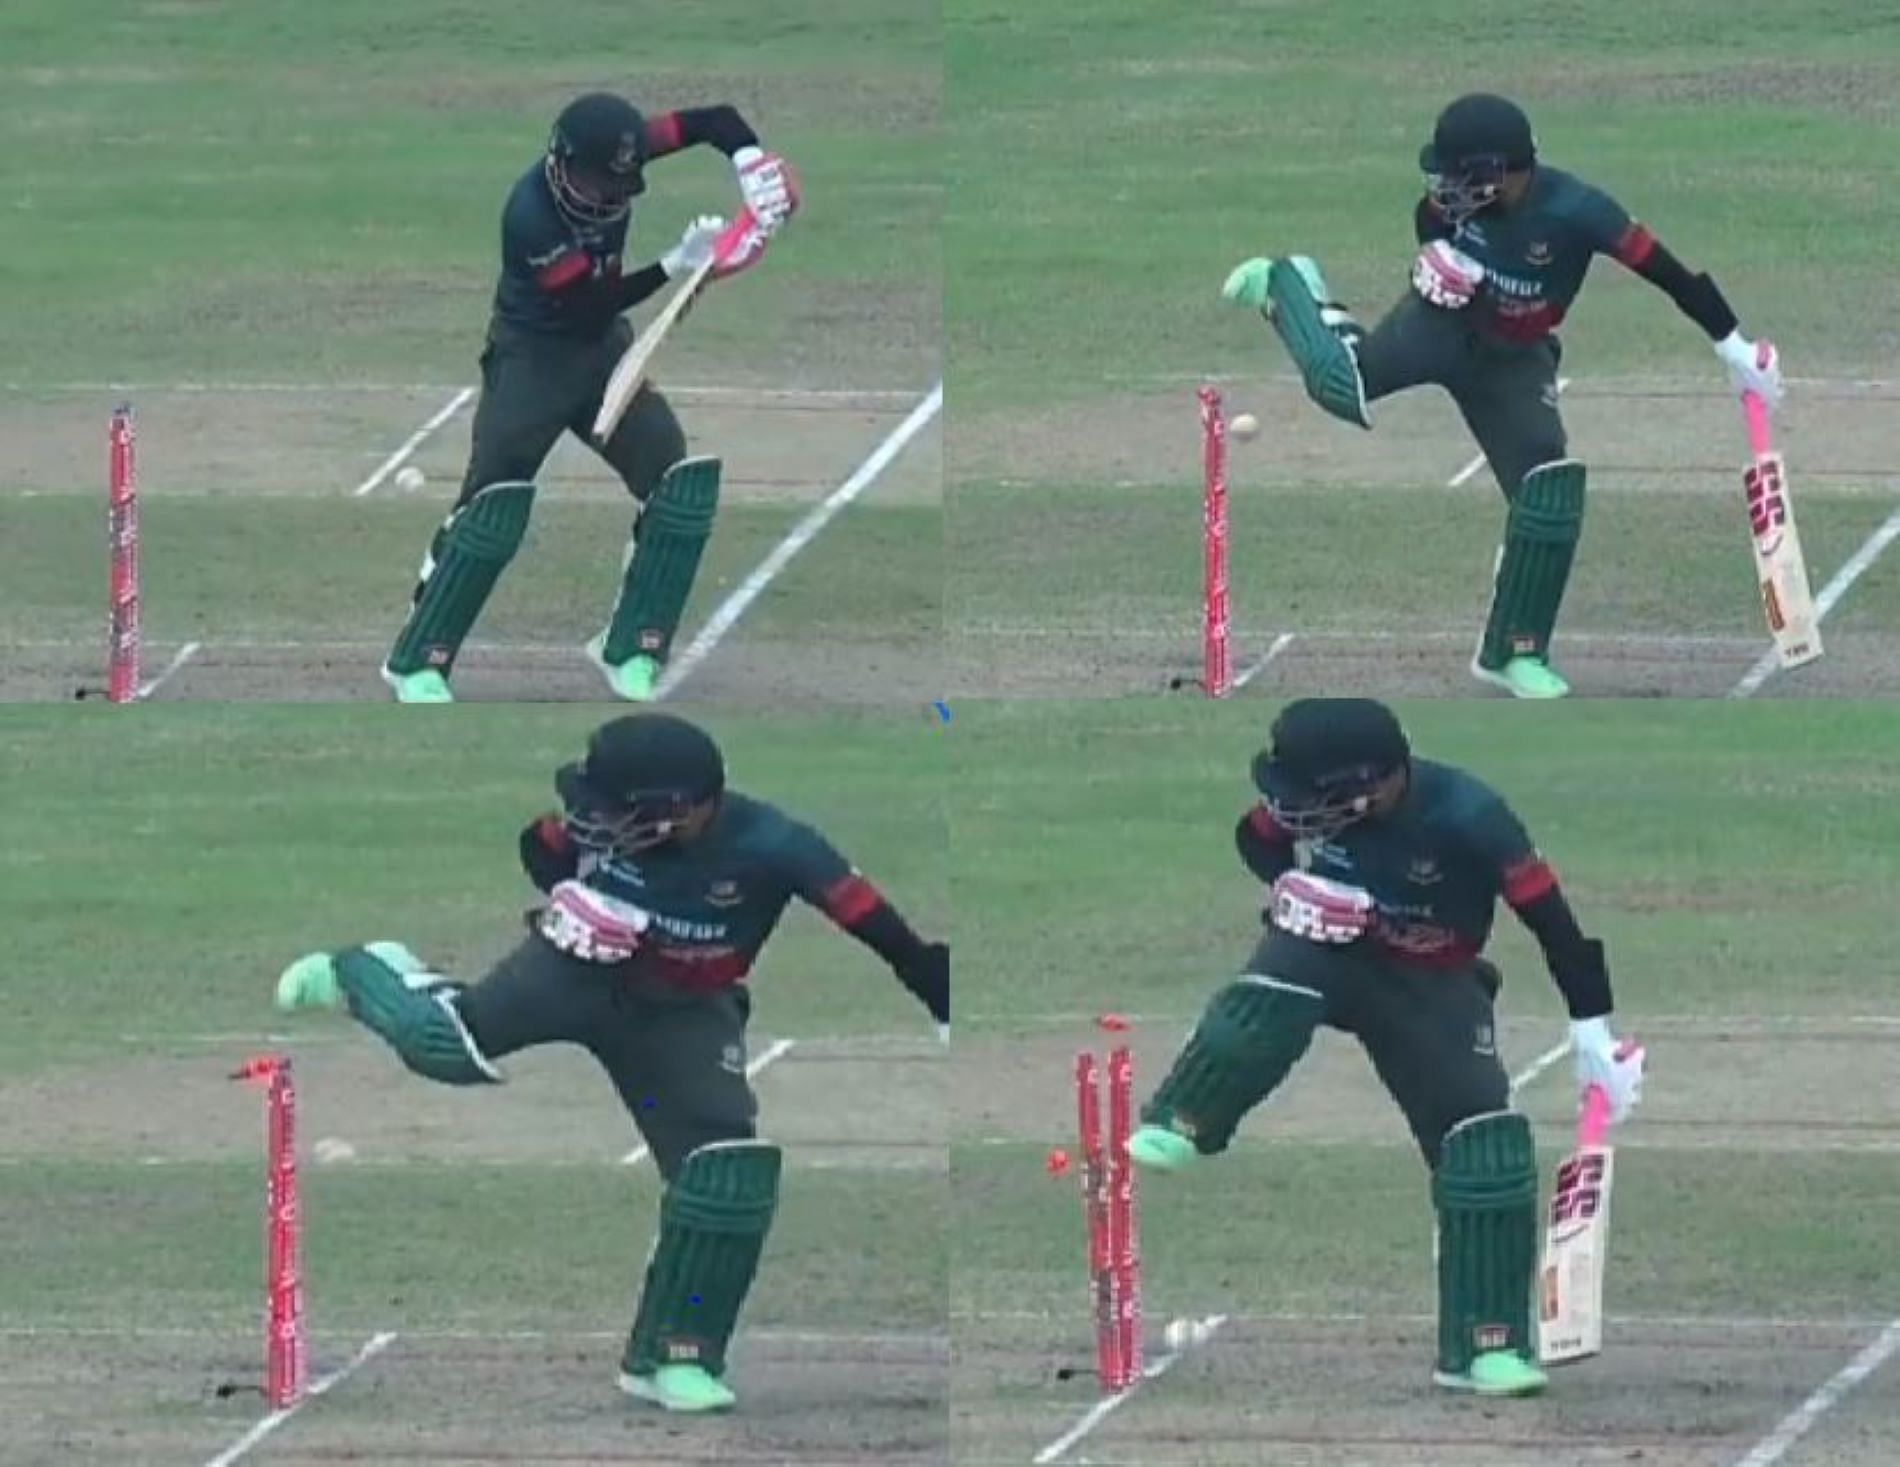 Rahim could not believe his luck after seeing the stumps dislodged